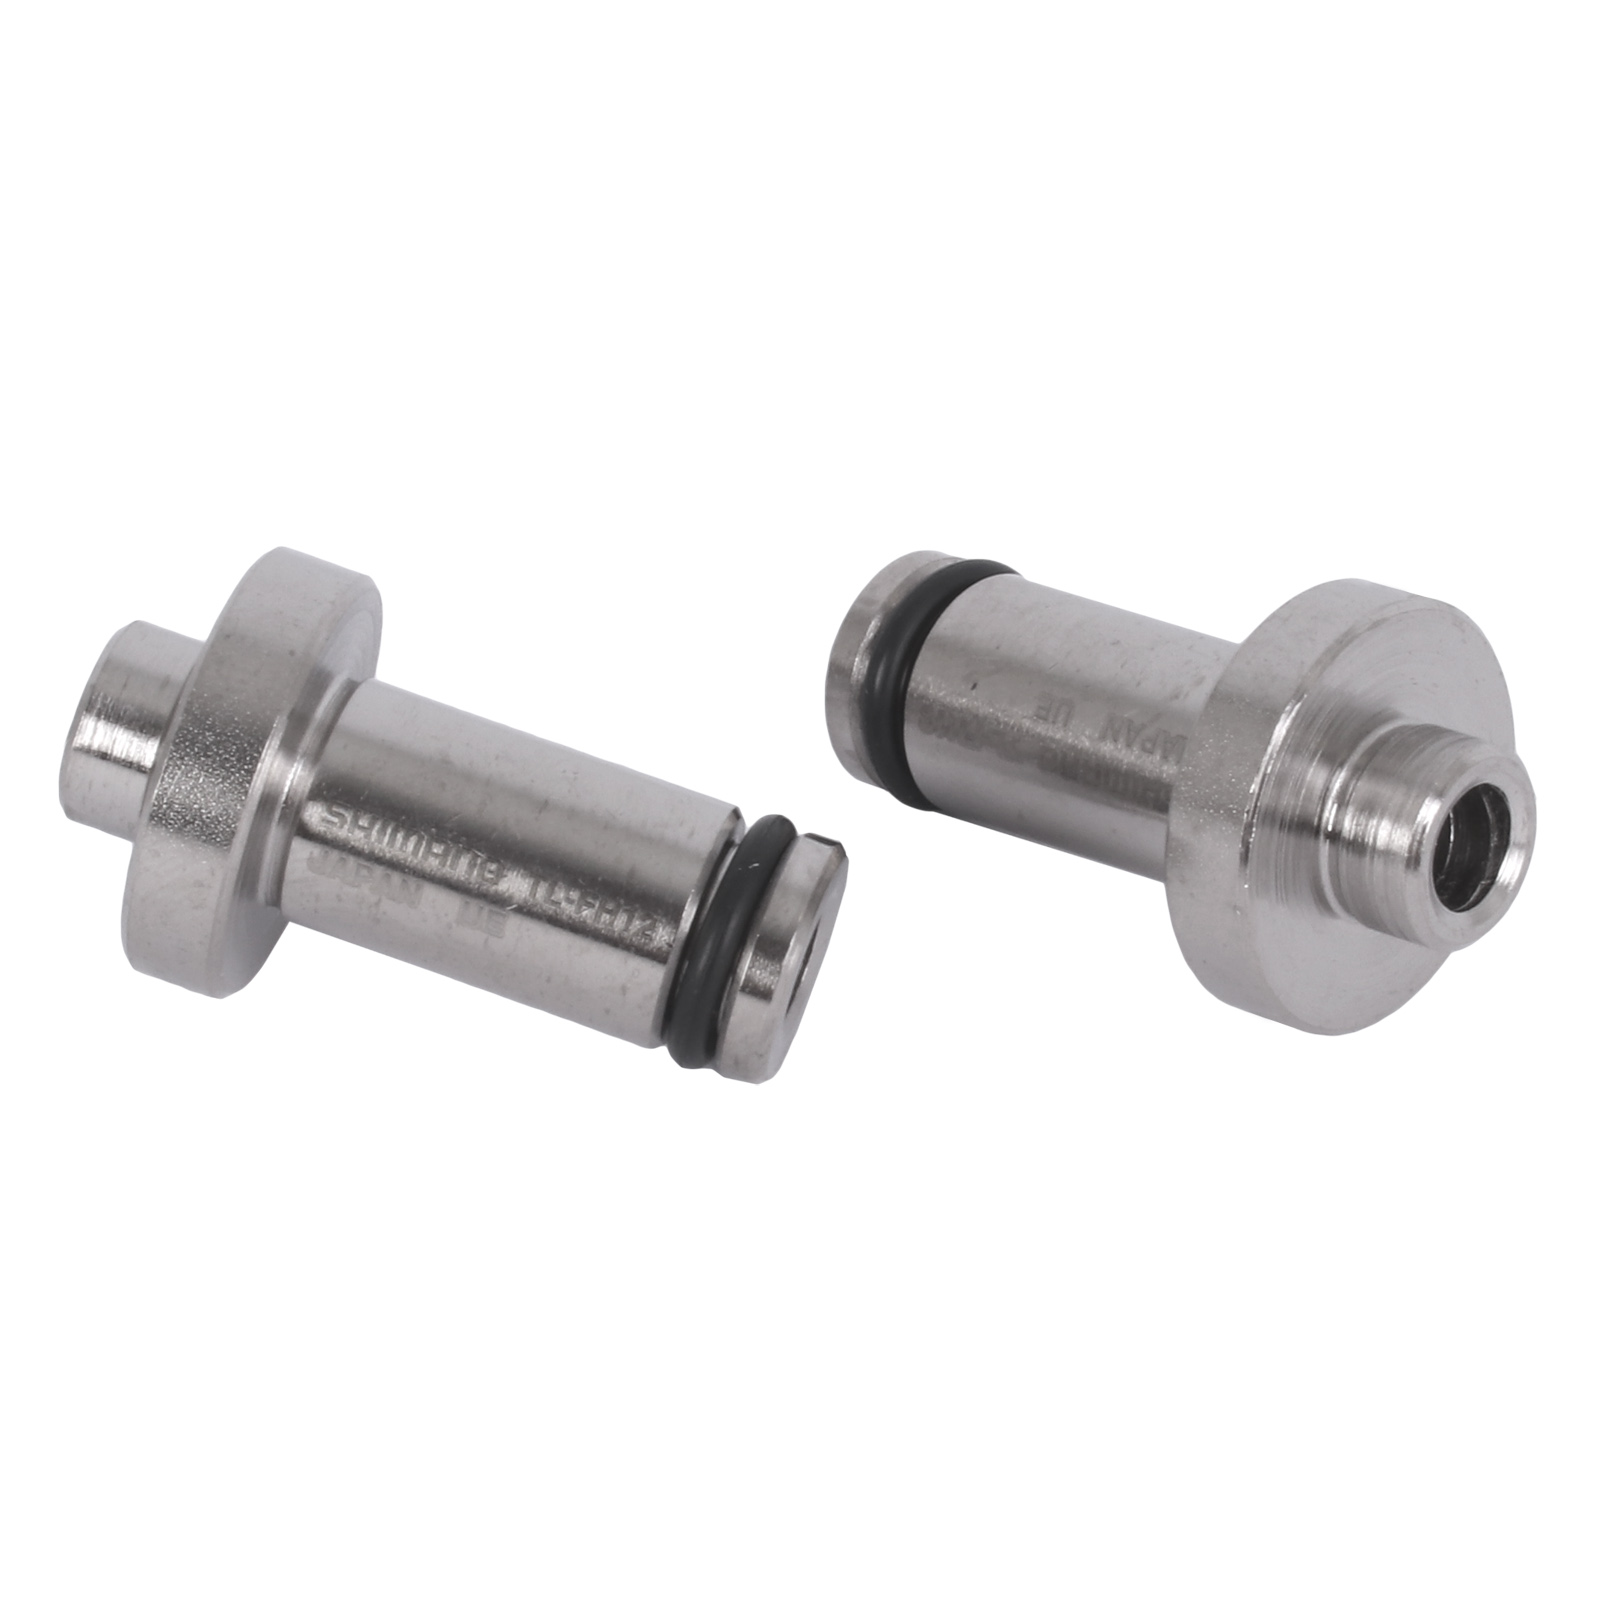 Picture of Shimano TL-FH12  Hub Setting Tool for 12 mm Thru-Axle FH